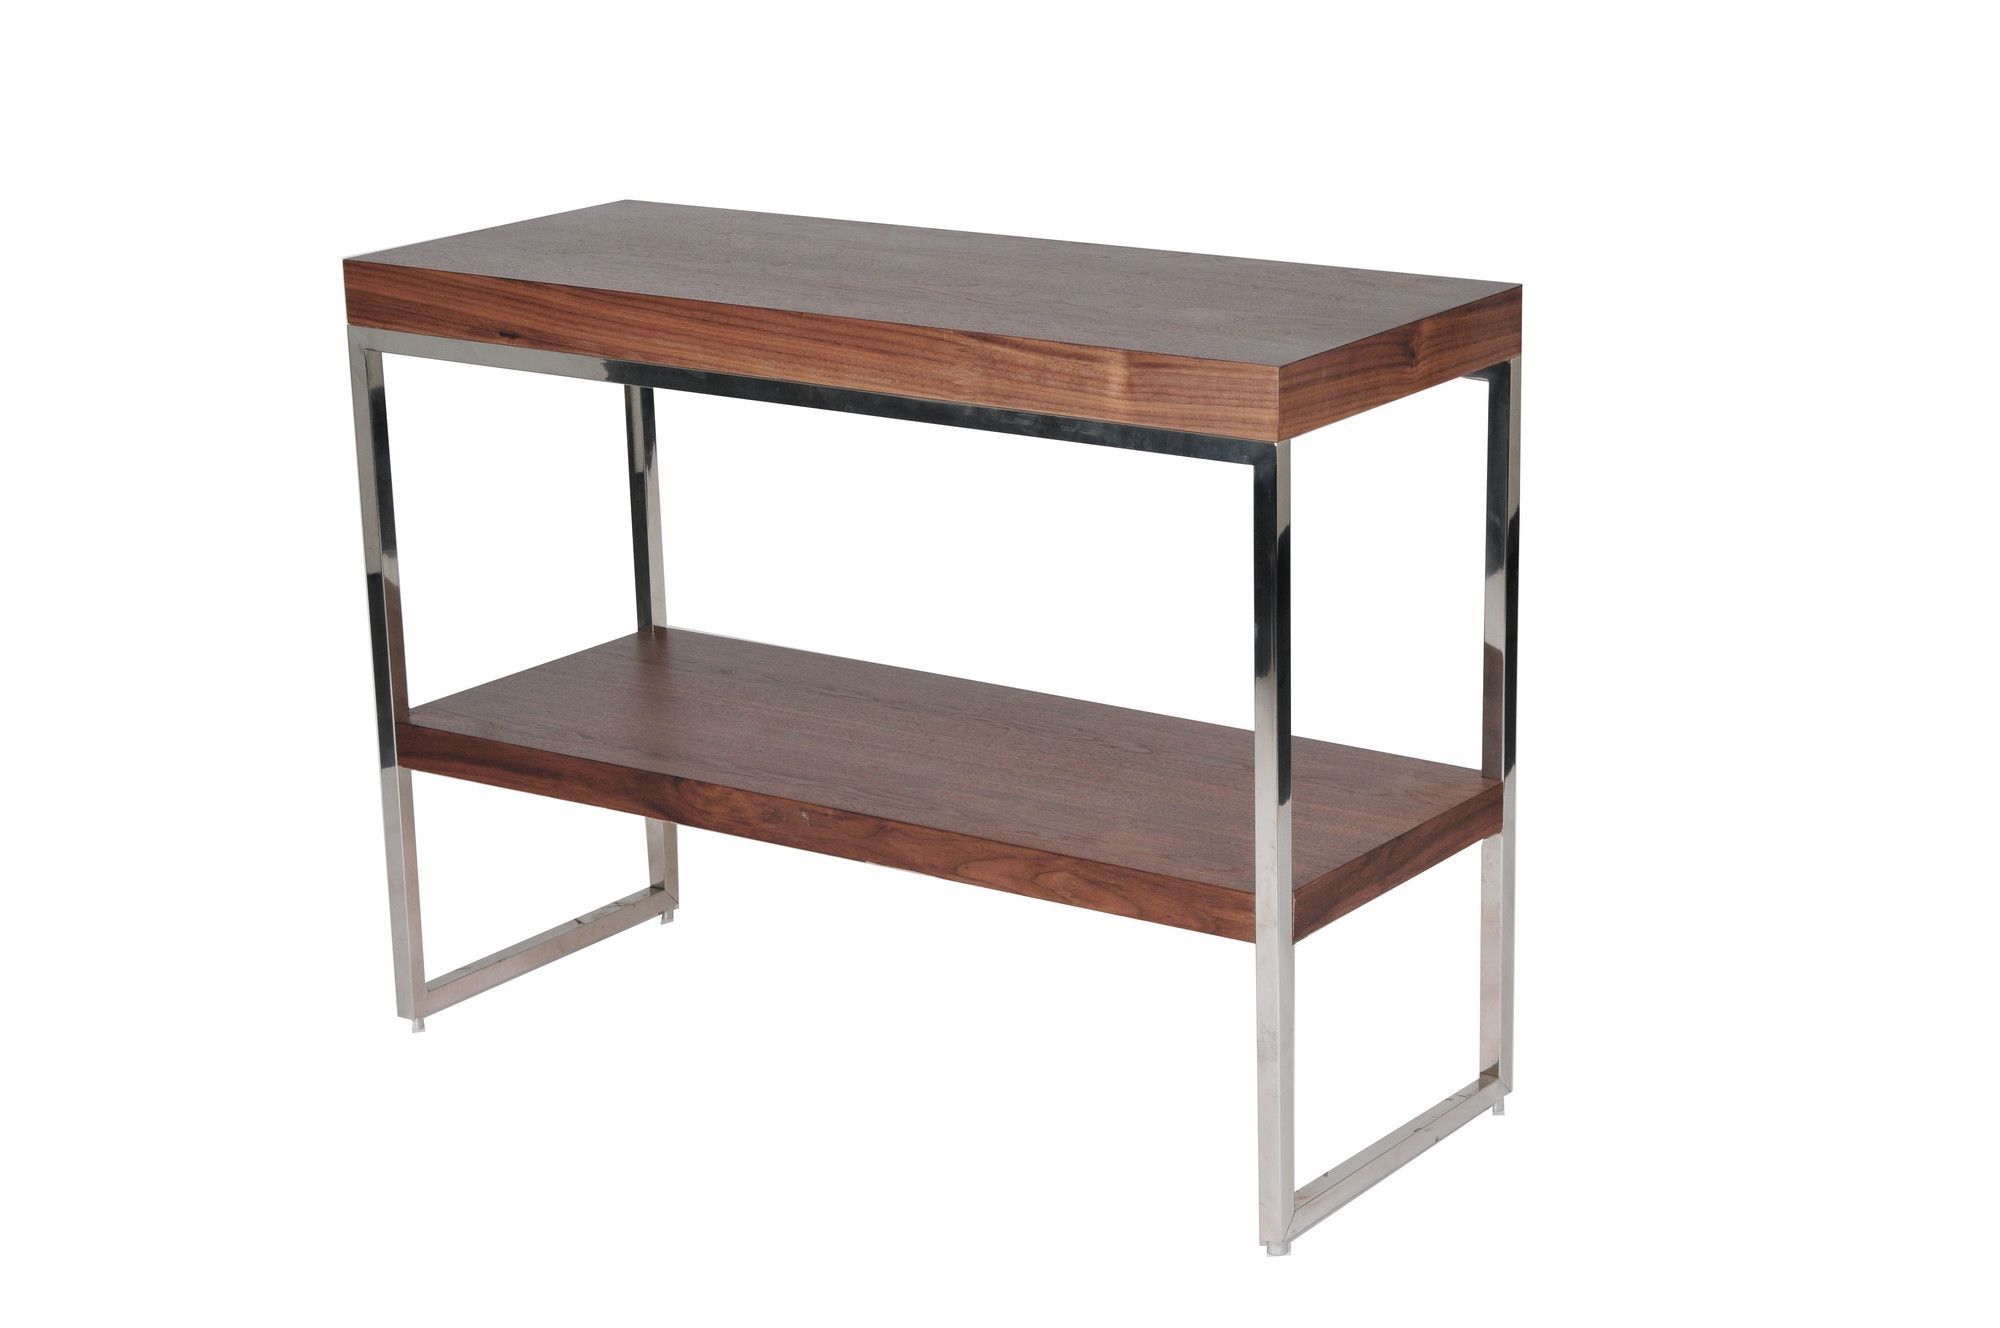 Furniture, Home Pertaining To 2020 Pecan Brown Triangular Console Tables (View 3 of 10)